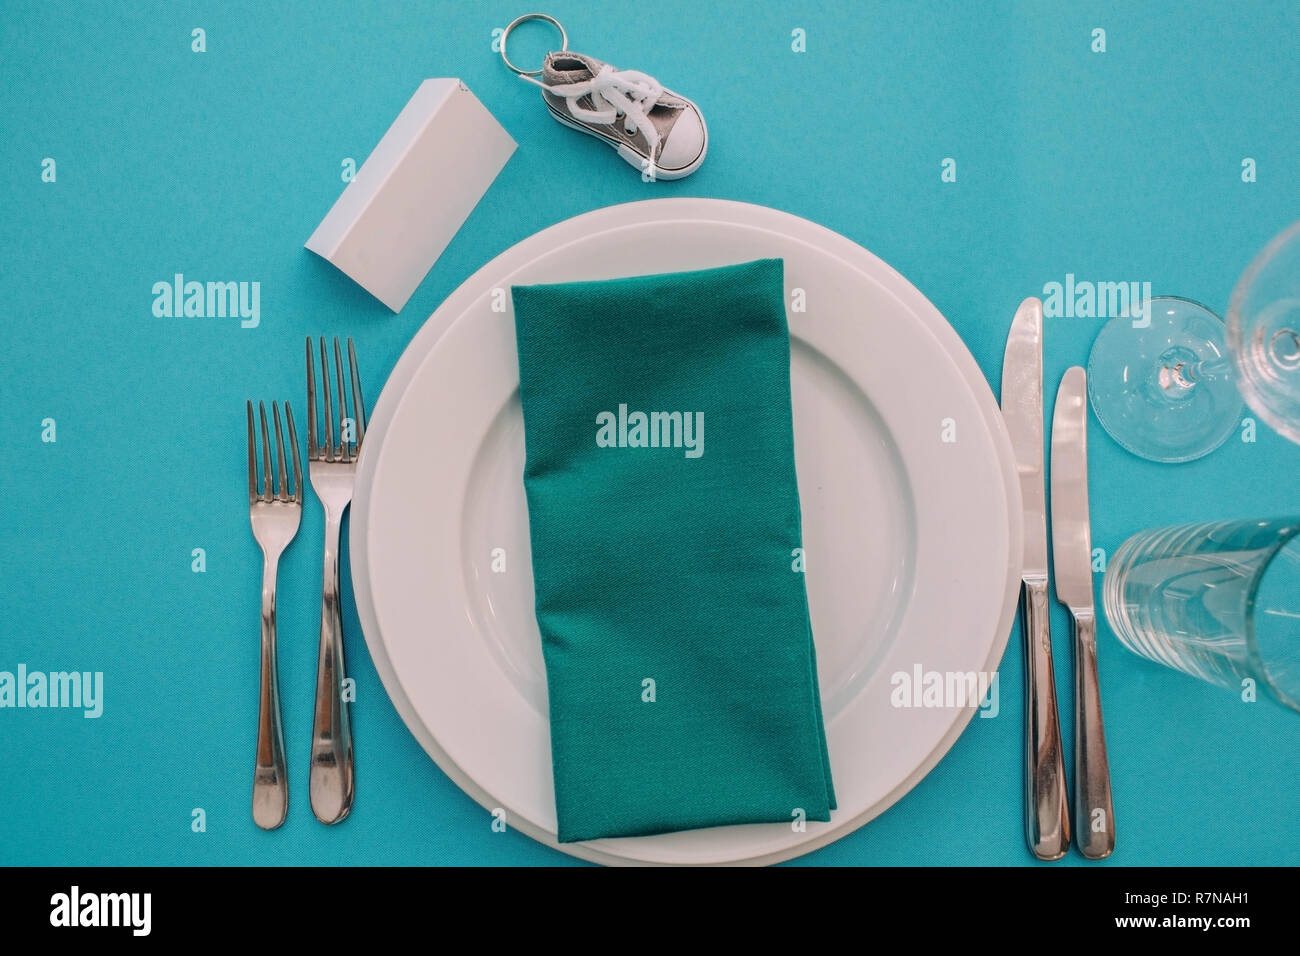 Dinner plate setting on a turquoise table , top view. Stock Photo